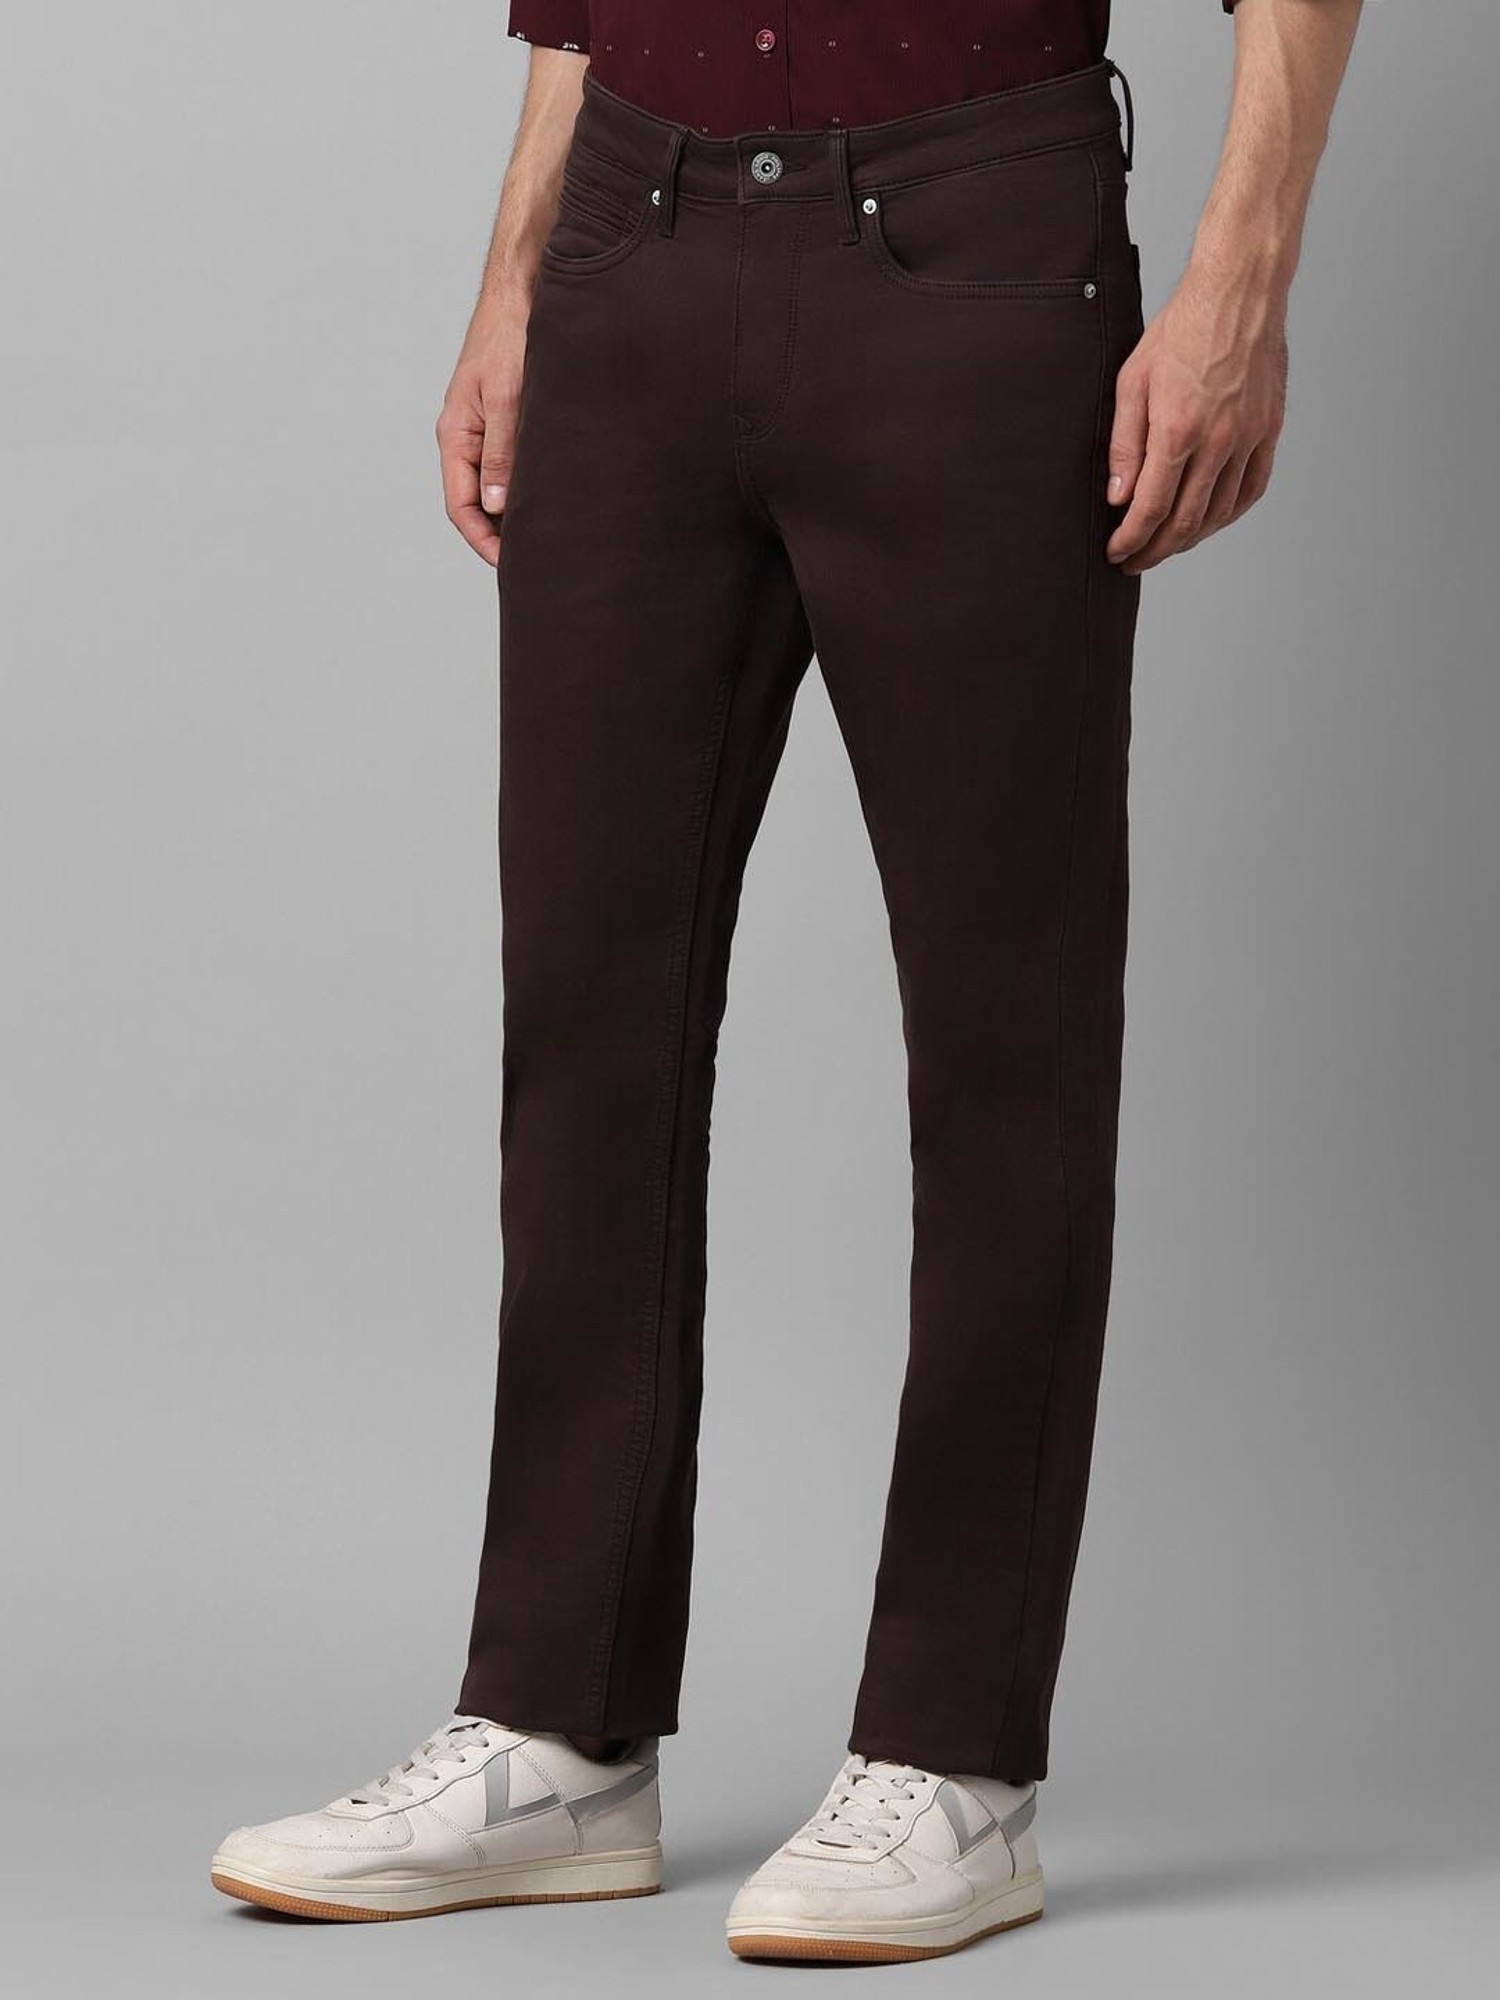 Brown jeans for men online | The perfect denim at ZALANDO-nttc.com.vn